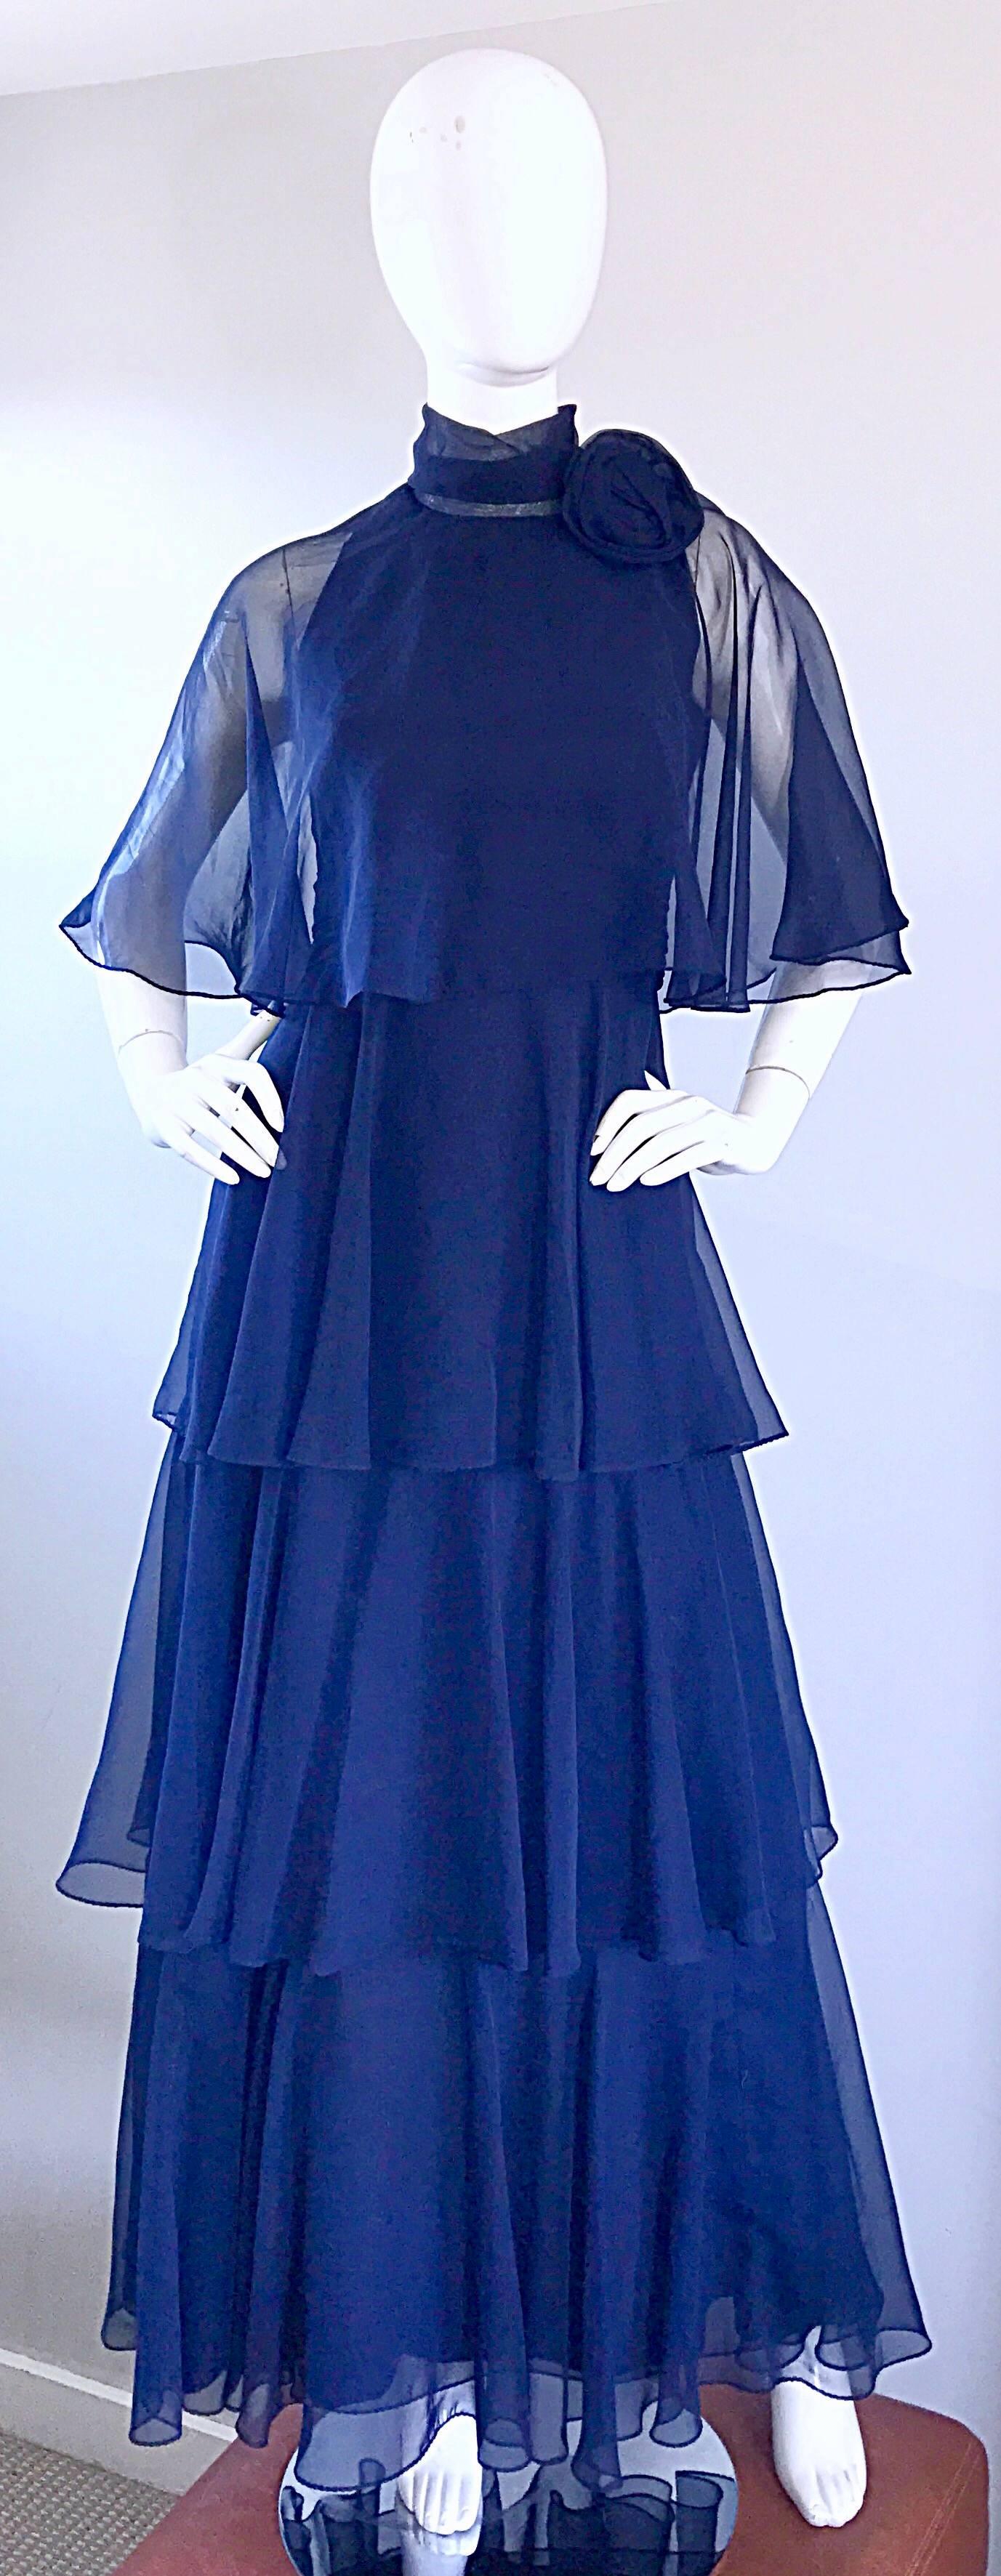 Gorgeous 70s vintage ELLIETTE LEWIS navy blue chiffon high neck tiered ruffle gown! Features three tiers of chiffon, with an attached chiffon caplet. Chiffon rosette at side neck. Full metal zipper up the back with hook-and-eye closure. Looks